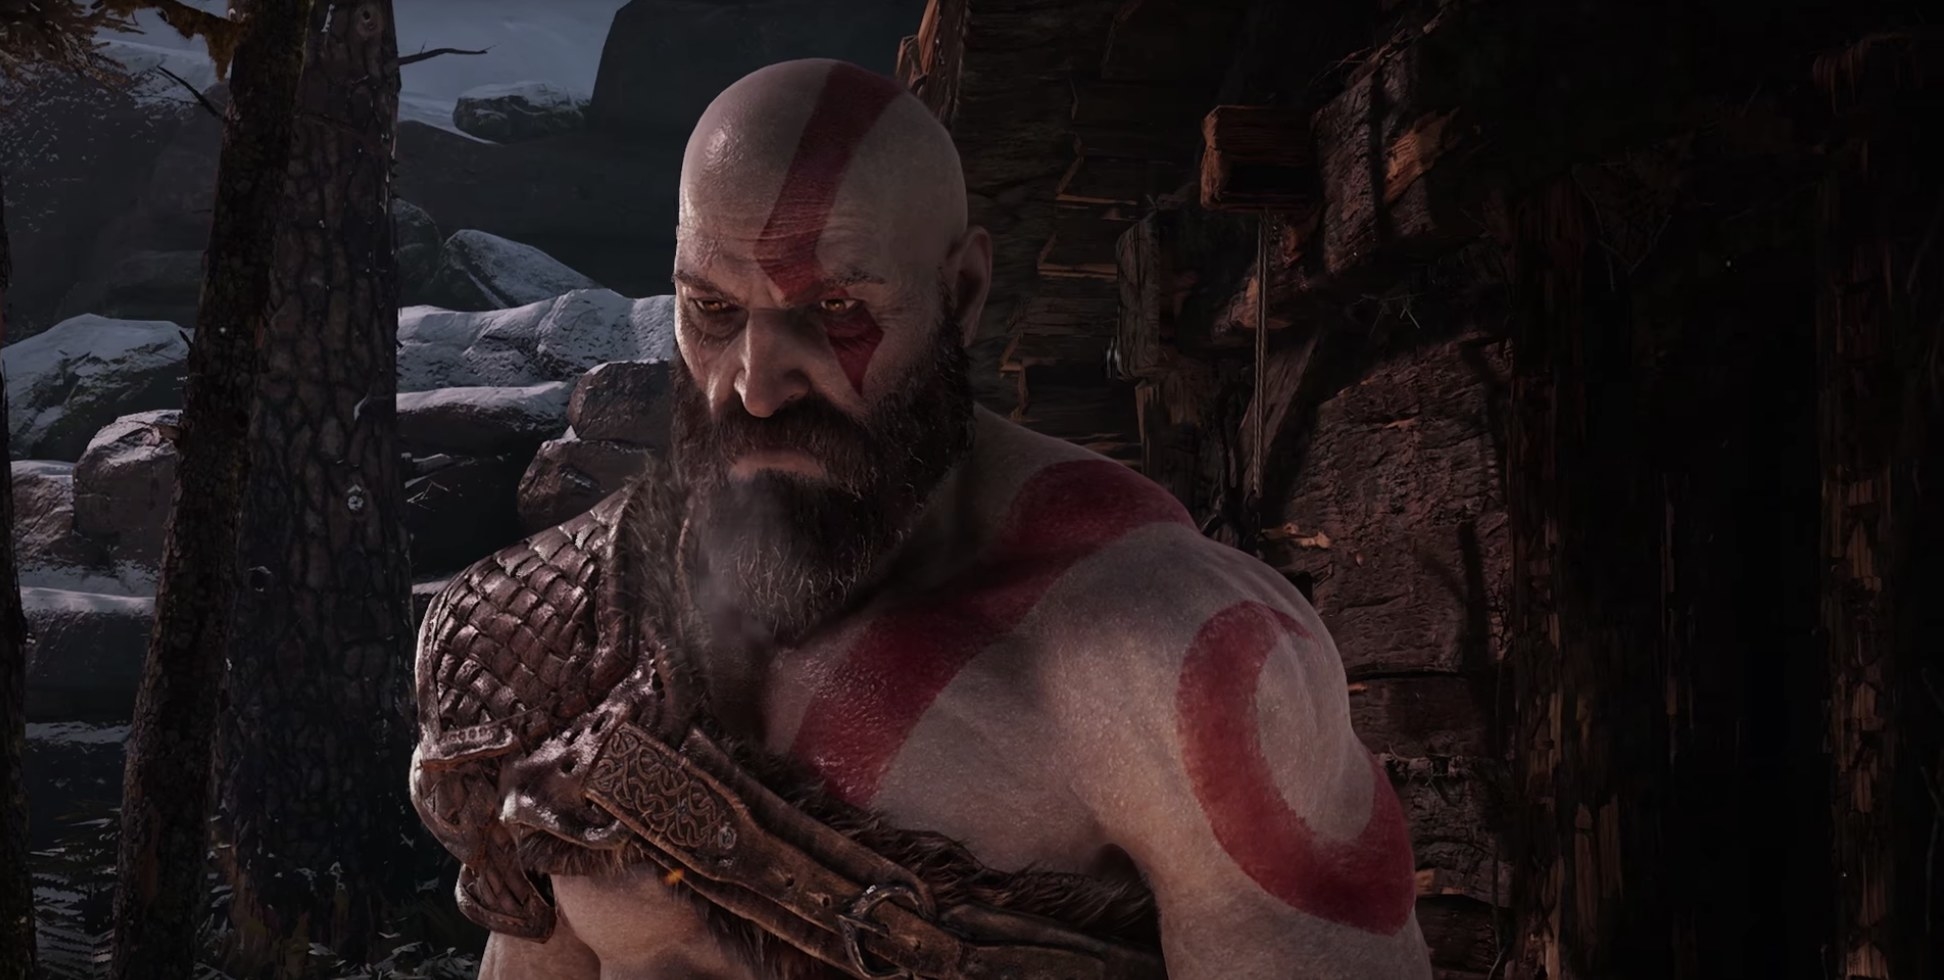 A gray-skinned man with red body paint and a beard stares solemnly in the distance